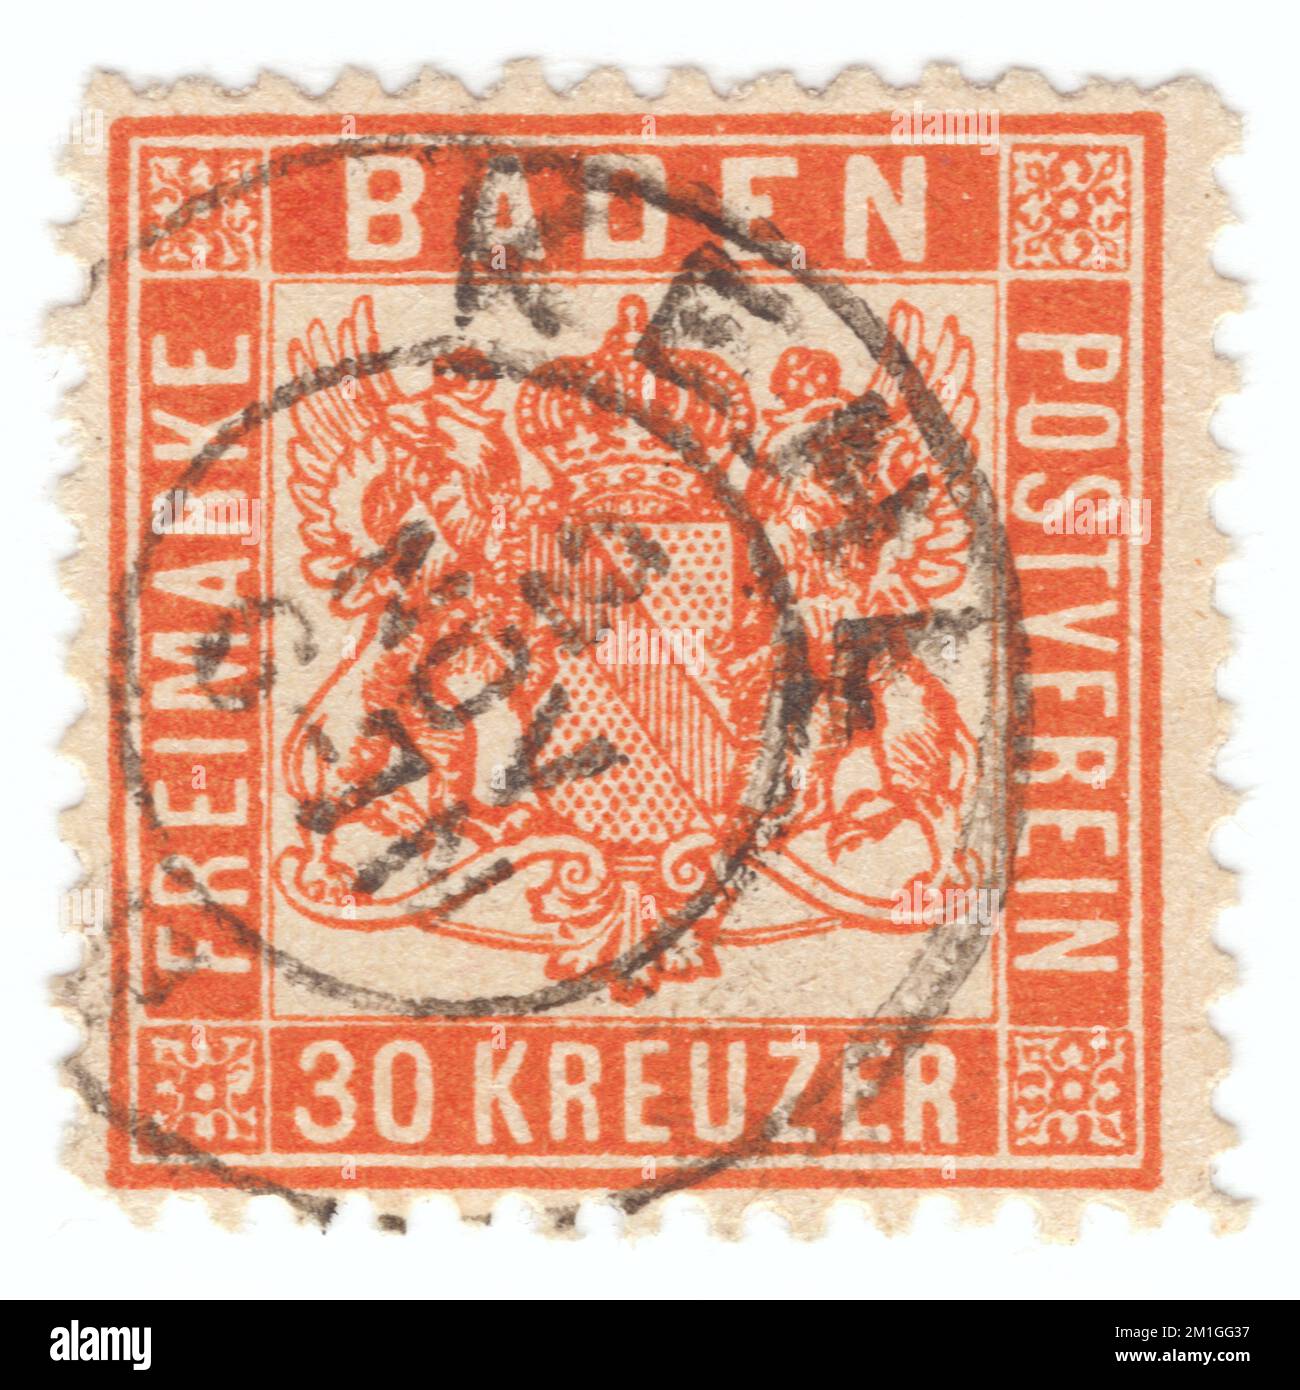 BADEN (One of the German states) — 1862:  original used 30 kreuzer deep orange postage stamp showing Coat of Arms with unshaded background Stock Photo